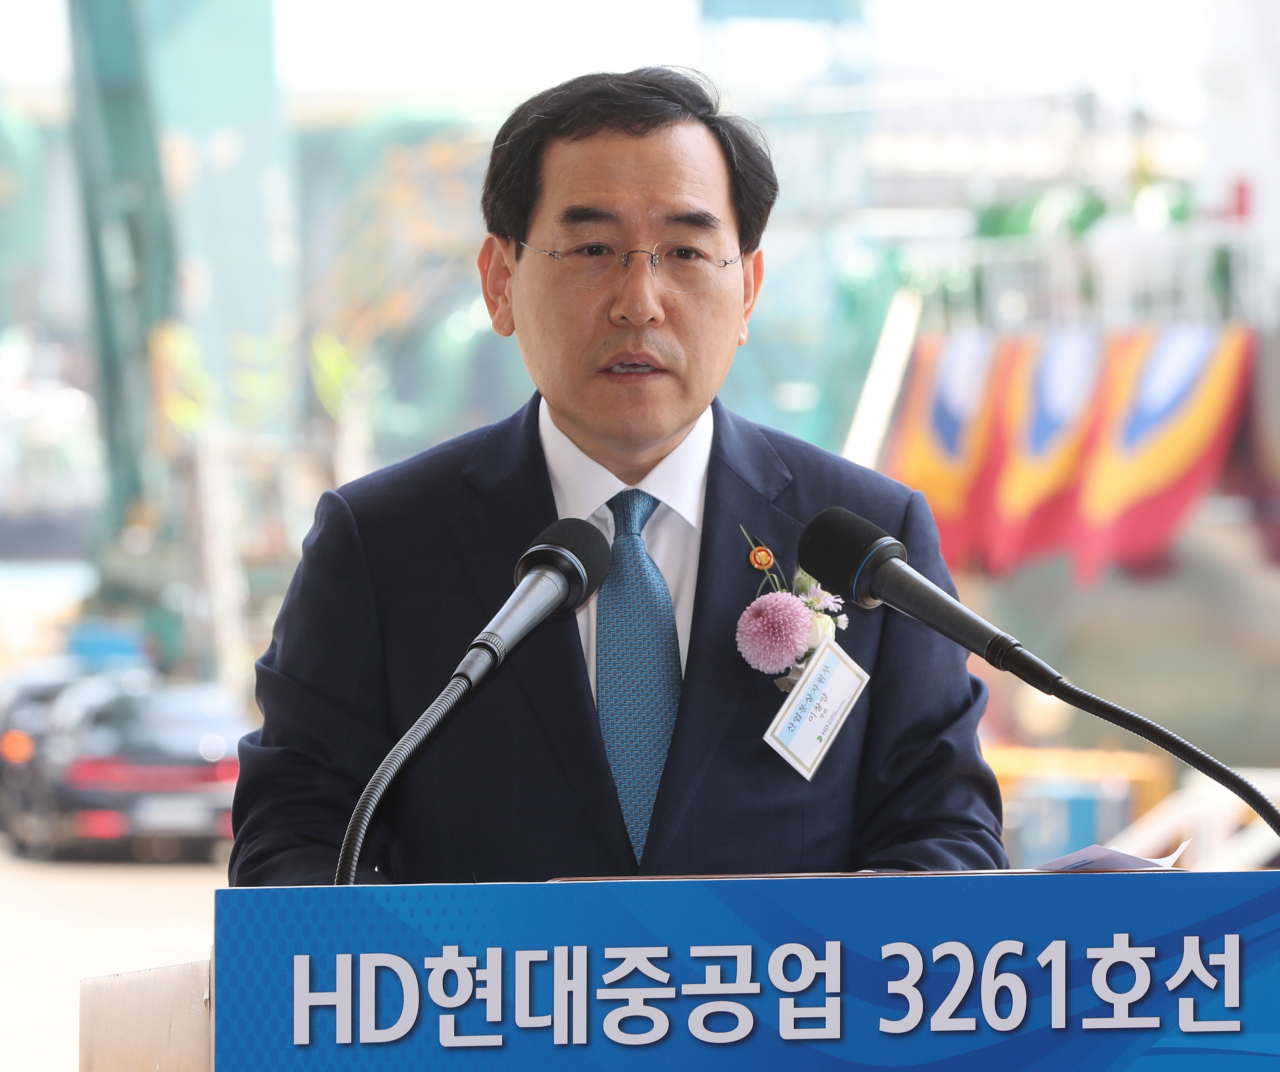 South Korean Minister of Trade, Industry and Energy Lee Chang-yang delivers a celebratory speech during the naming ceremony of HD Hyundai's liquefied natural gas bunker vessel Blue Whale in Ulsan, Wednesday. (Yonhap)